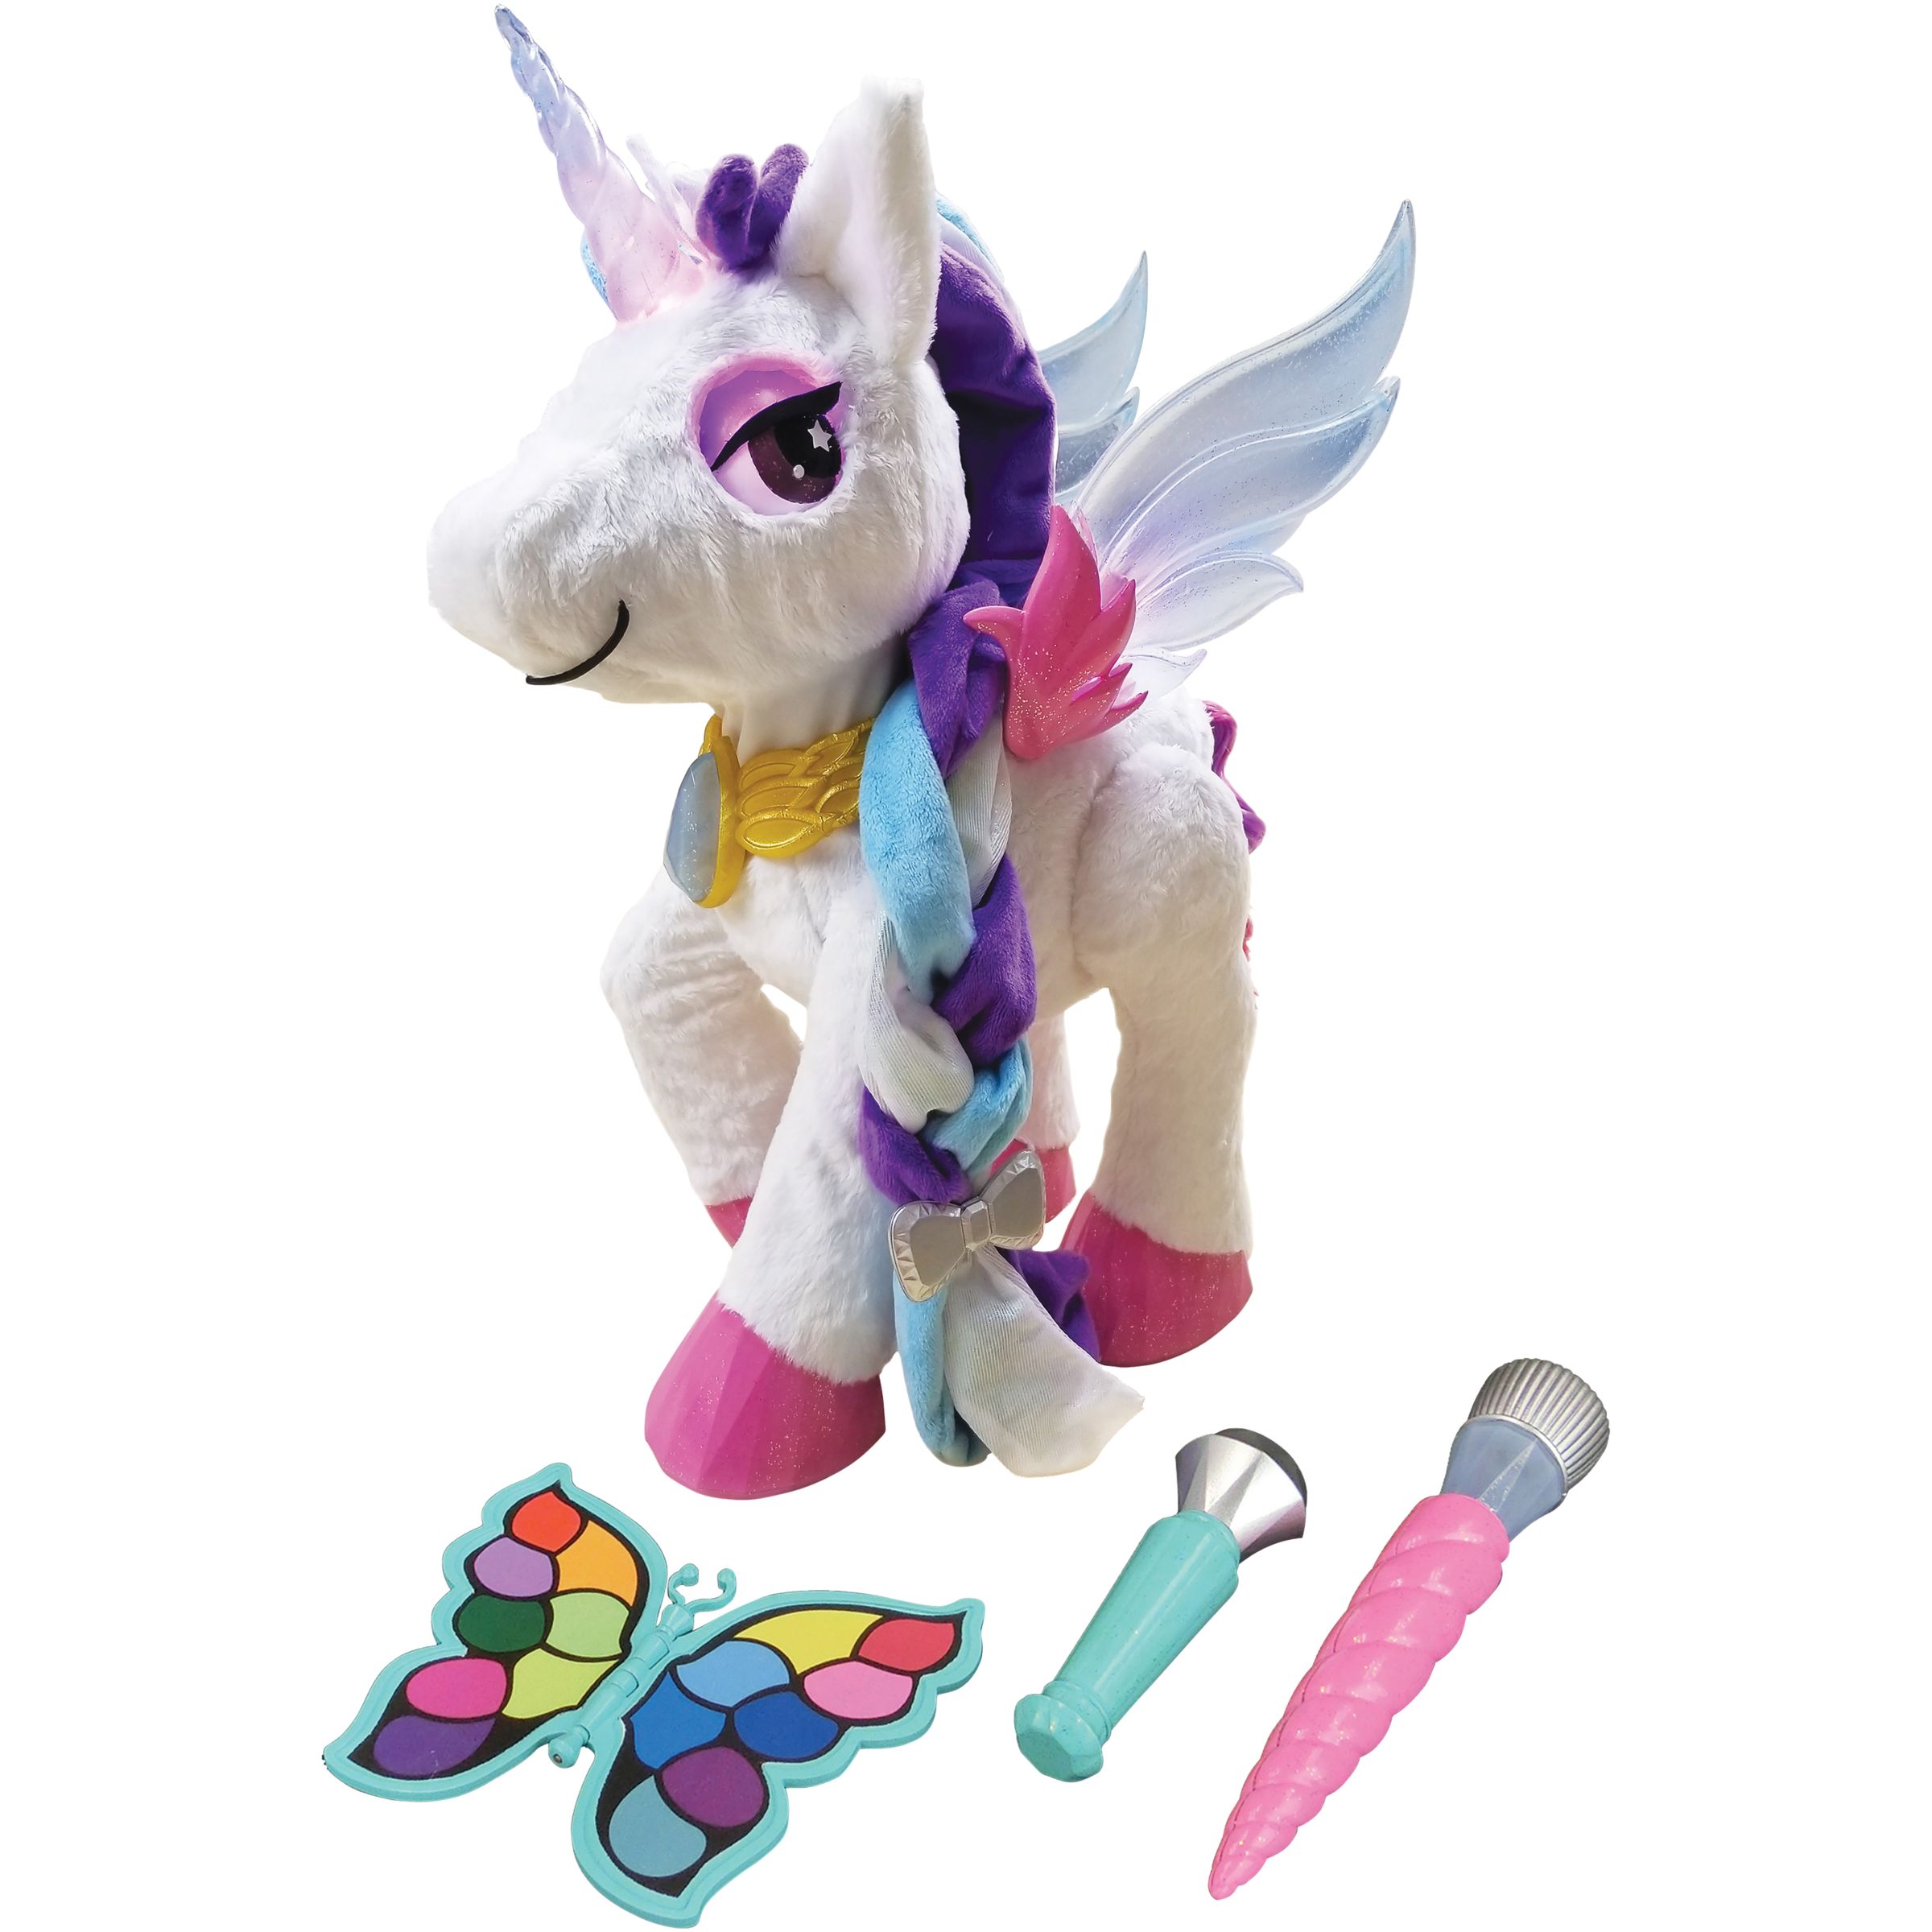 VTech Myla The Magical Make-up Unicorn Soft Toy With Microphone for Kids for sale online 